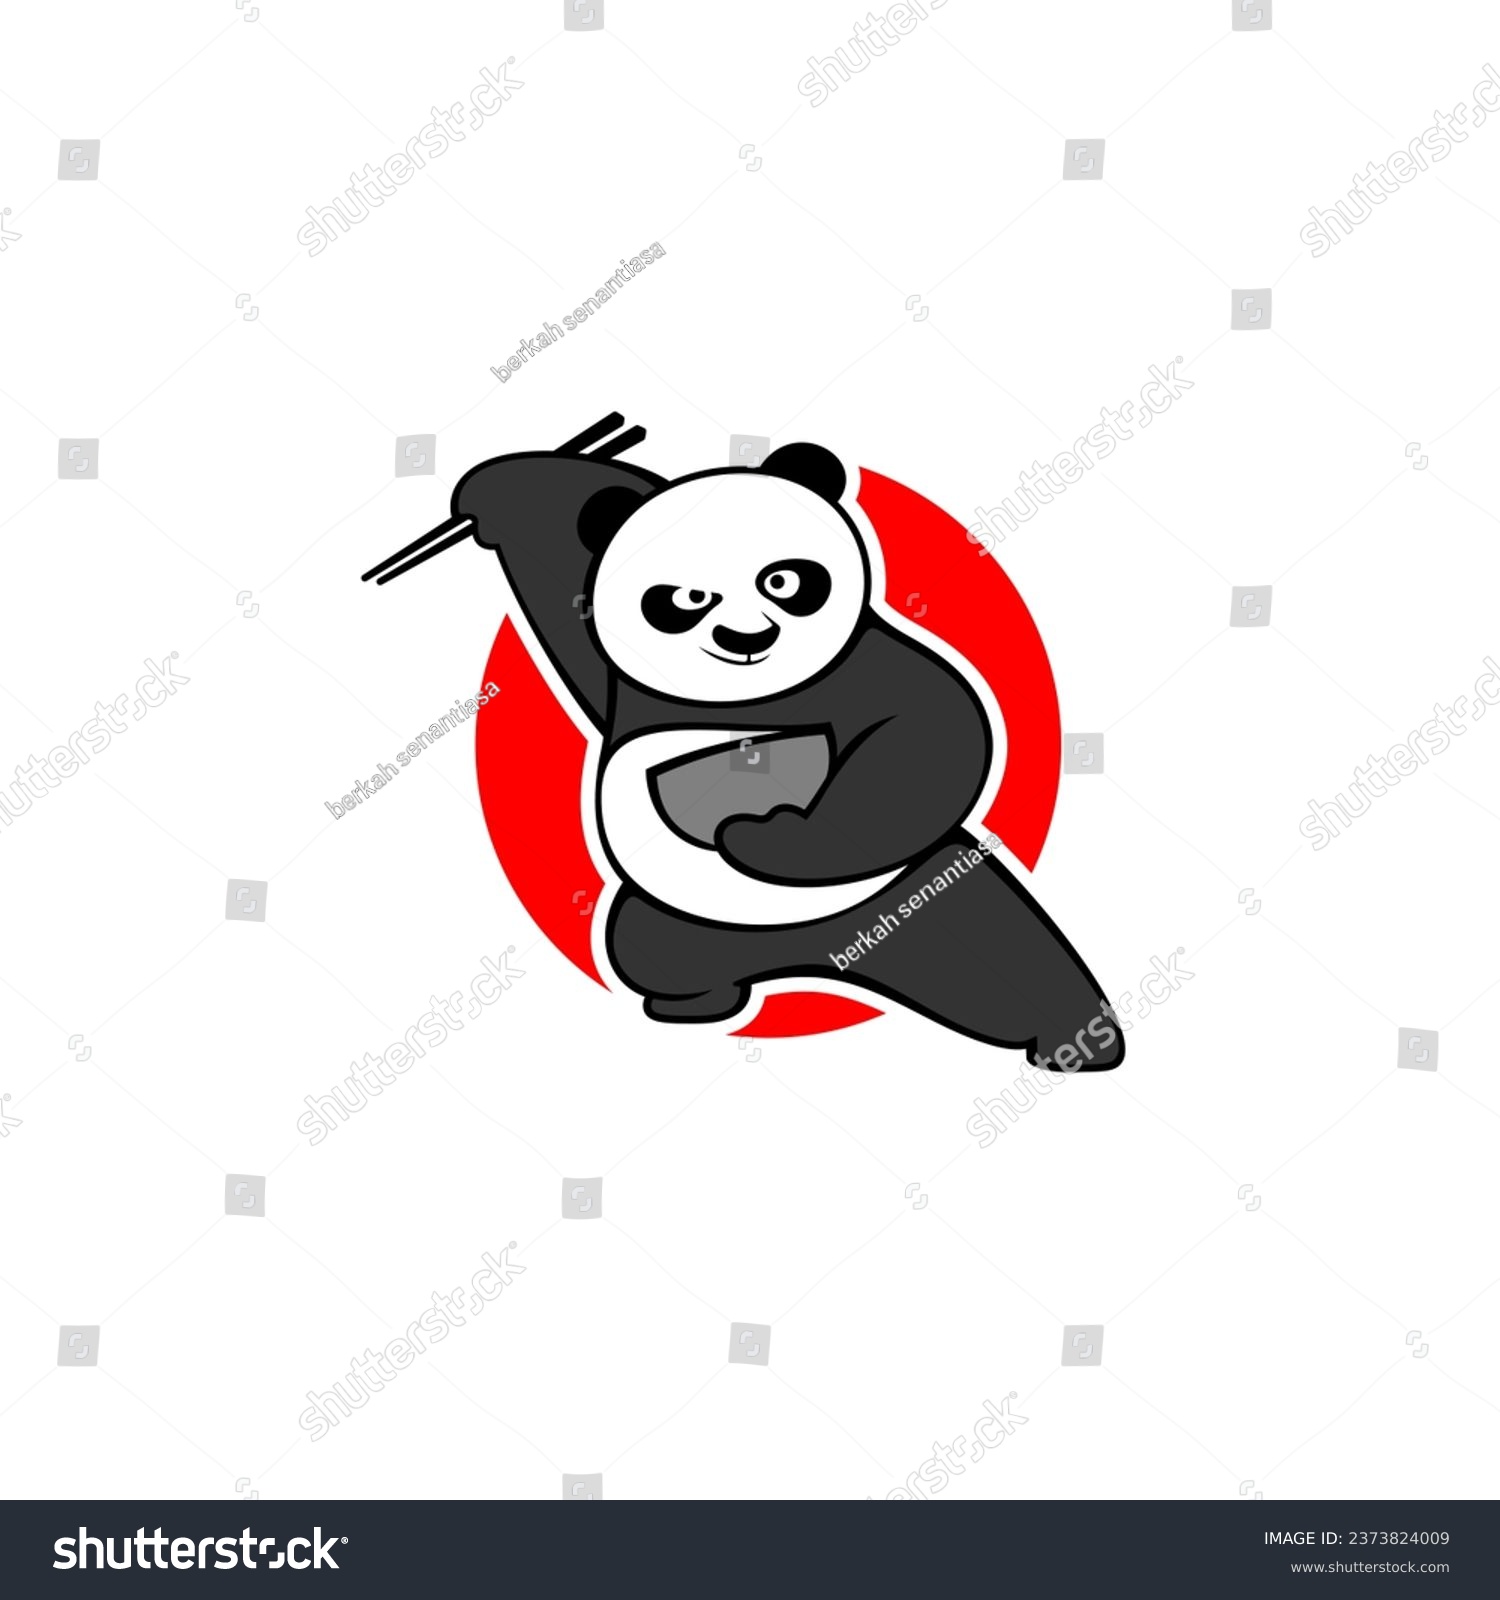 SVG of Chinese food logo design. Vector illustration of panda holding a pair of chopsticks and bowl. modern logo design vector icon template svg